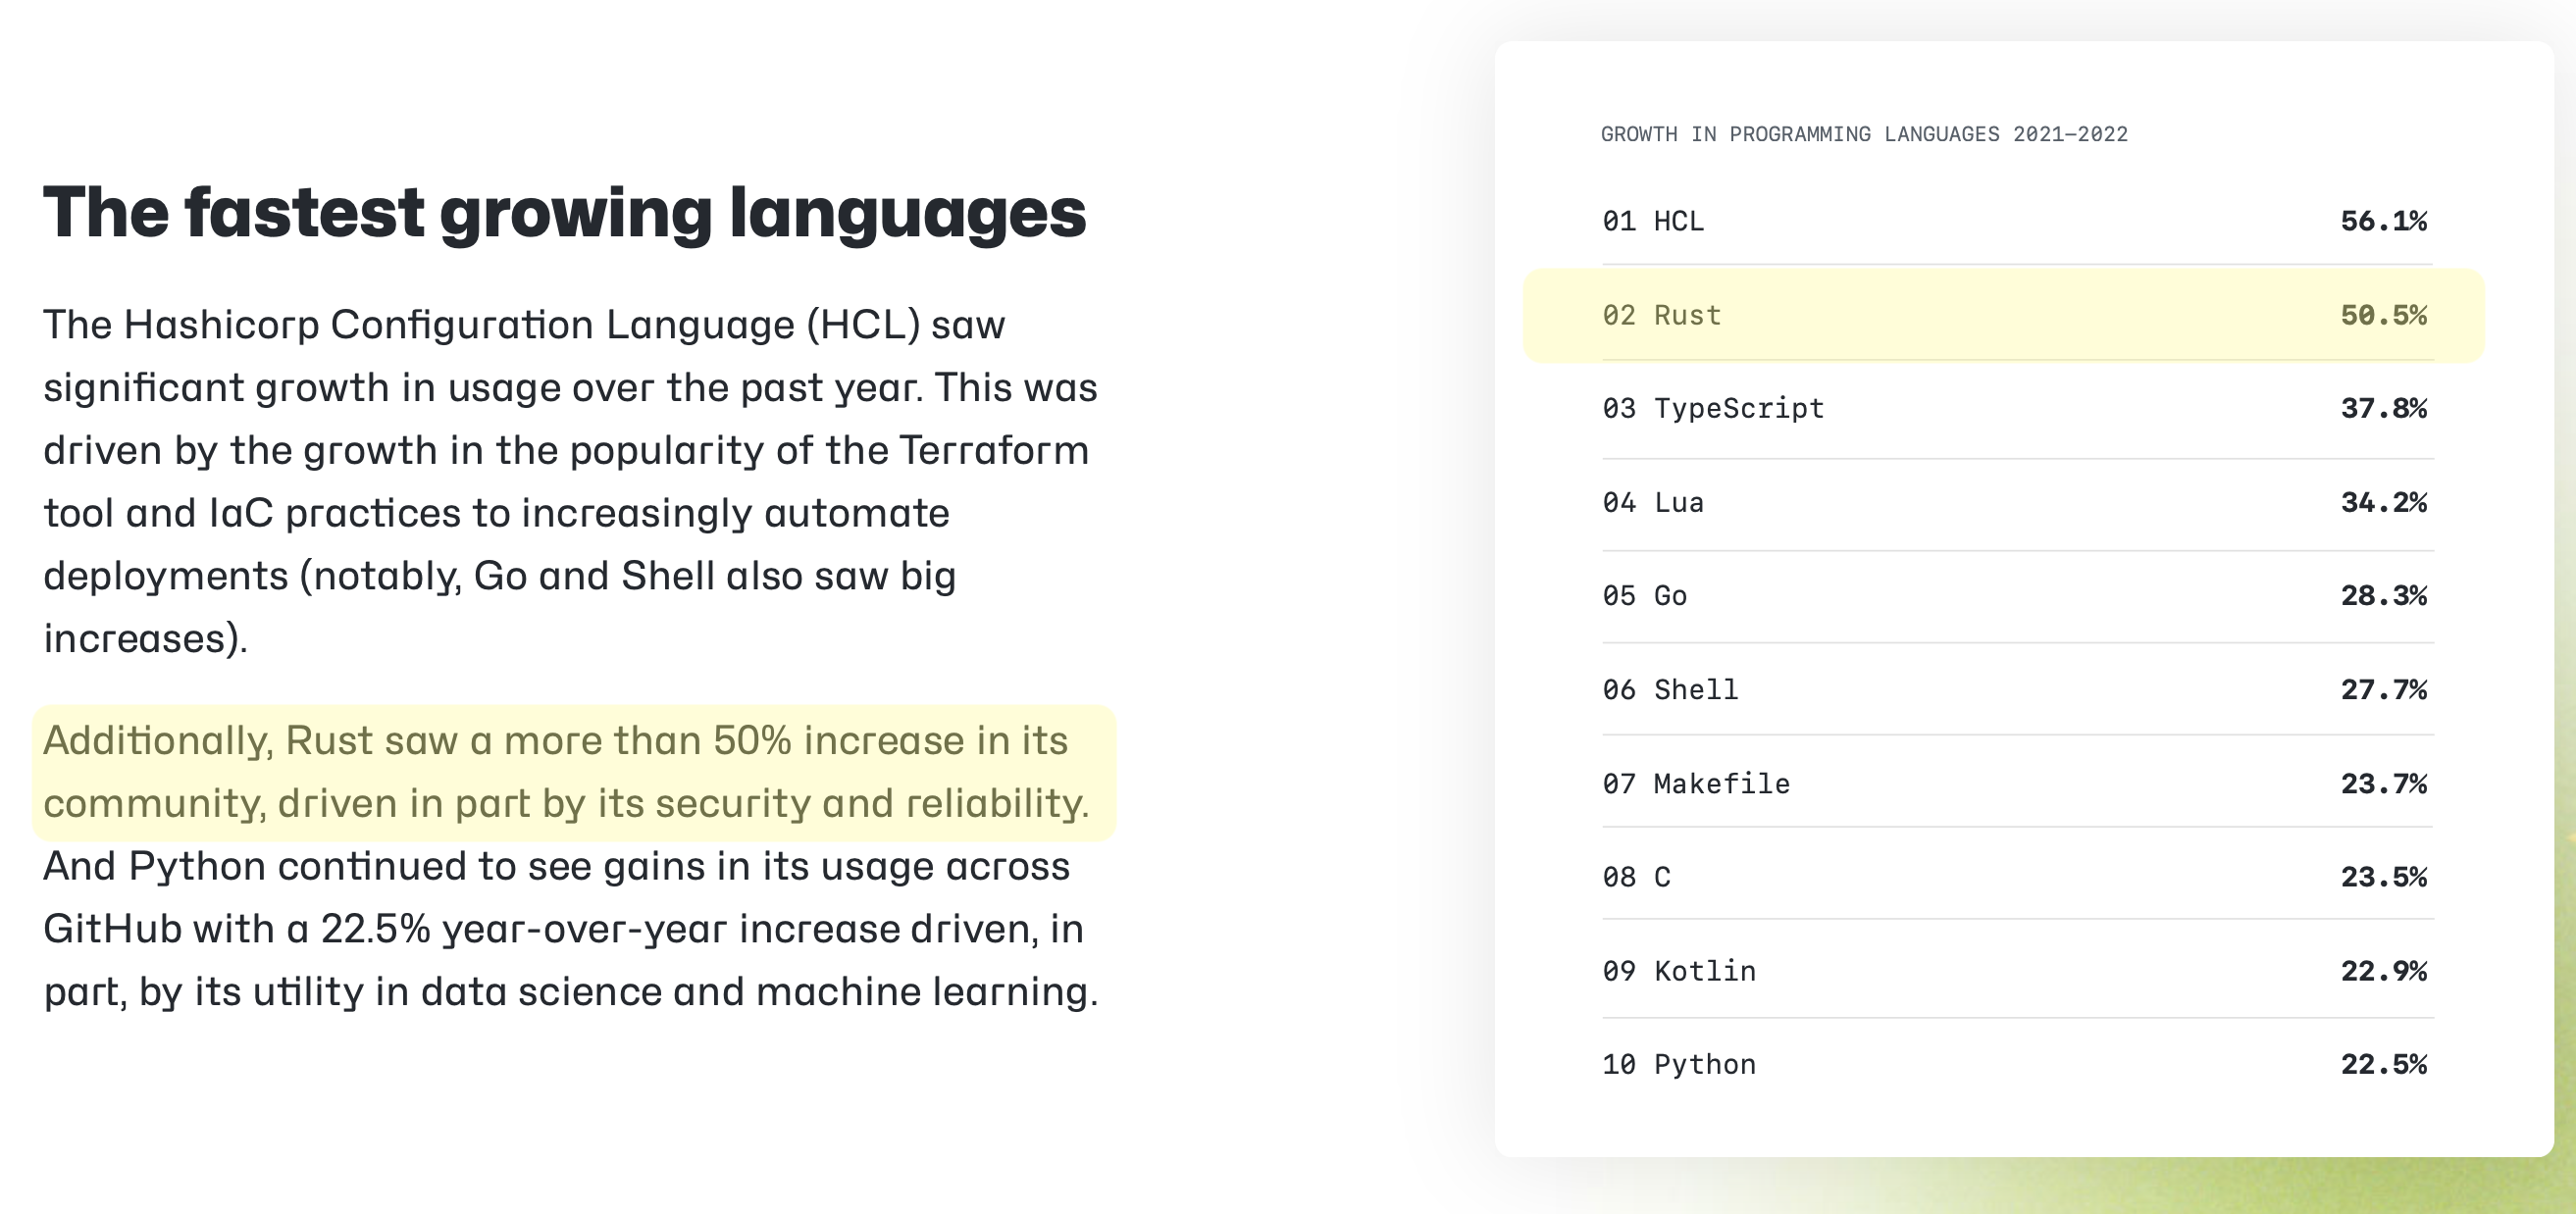 A screenshot highlighting Rust as one of the fastest growing languages in 2022